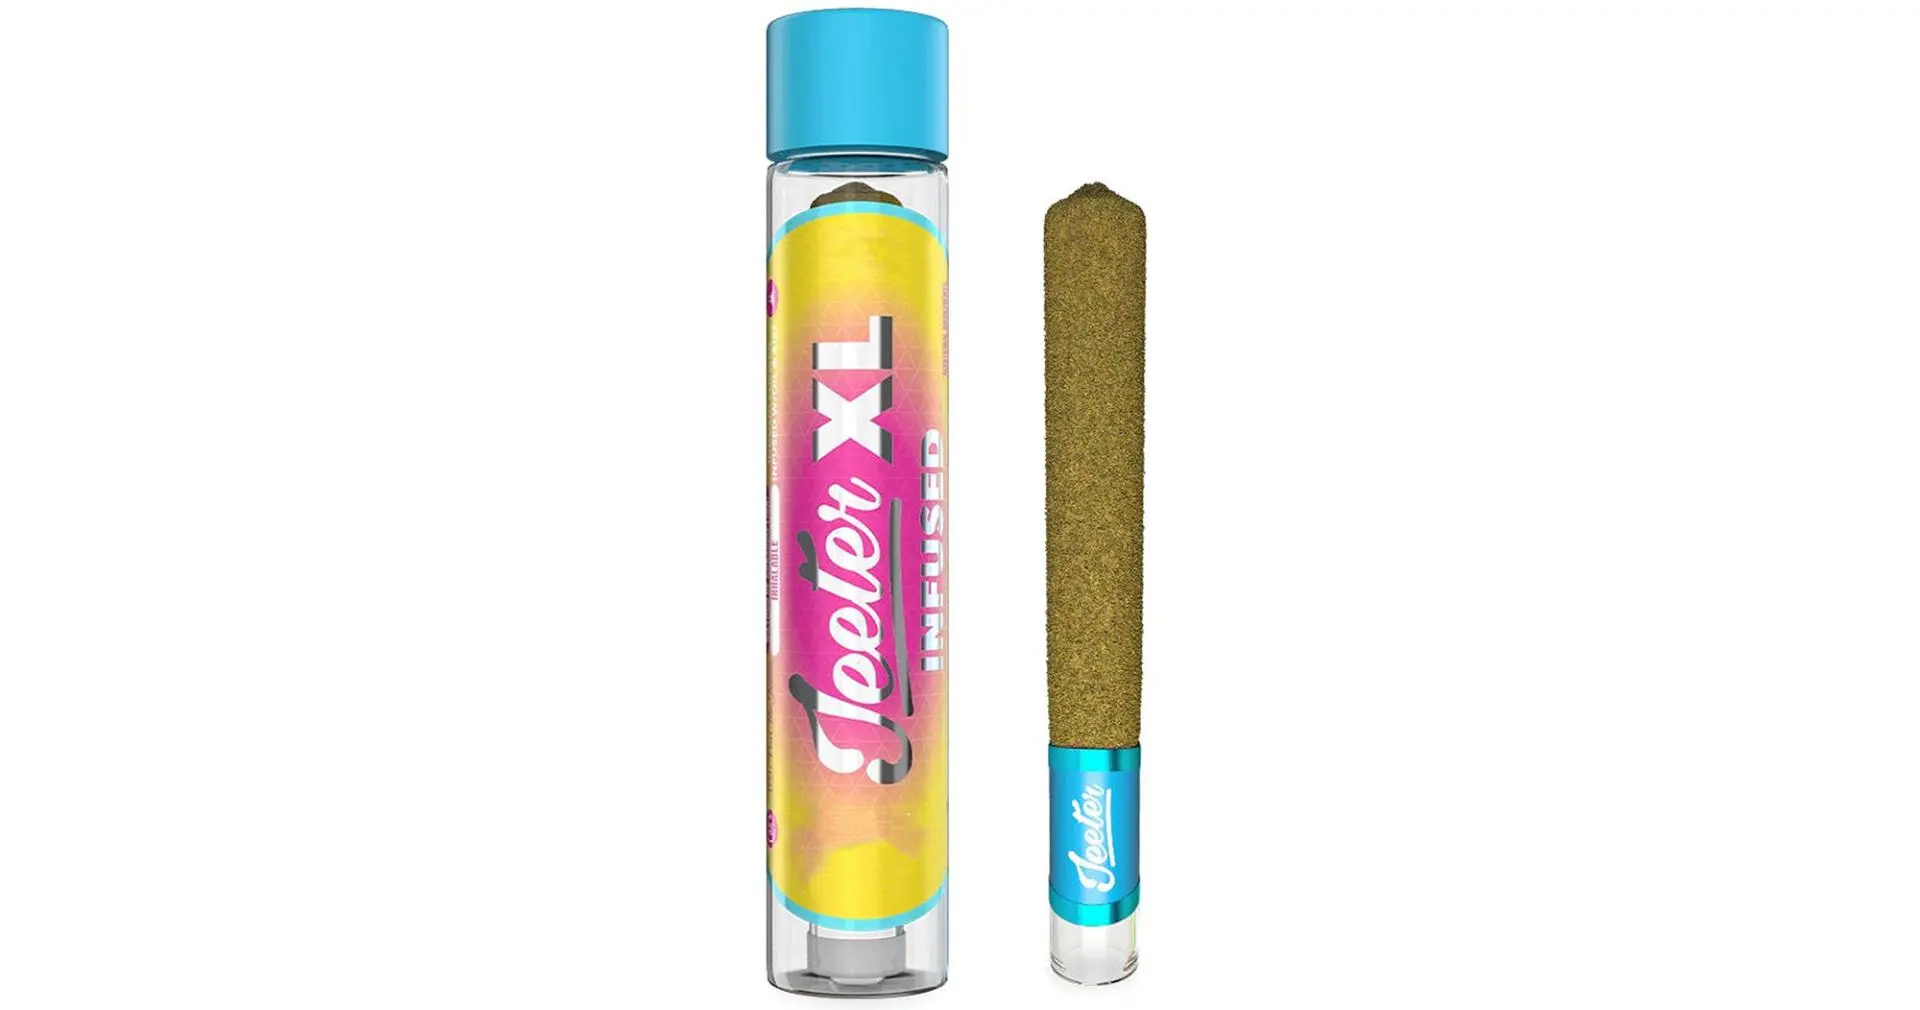 Apples & Bananas XL Infused Pre-Roll